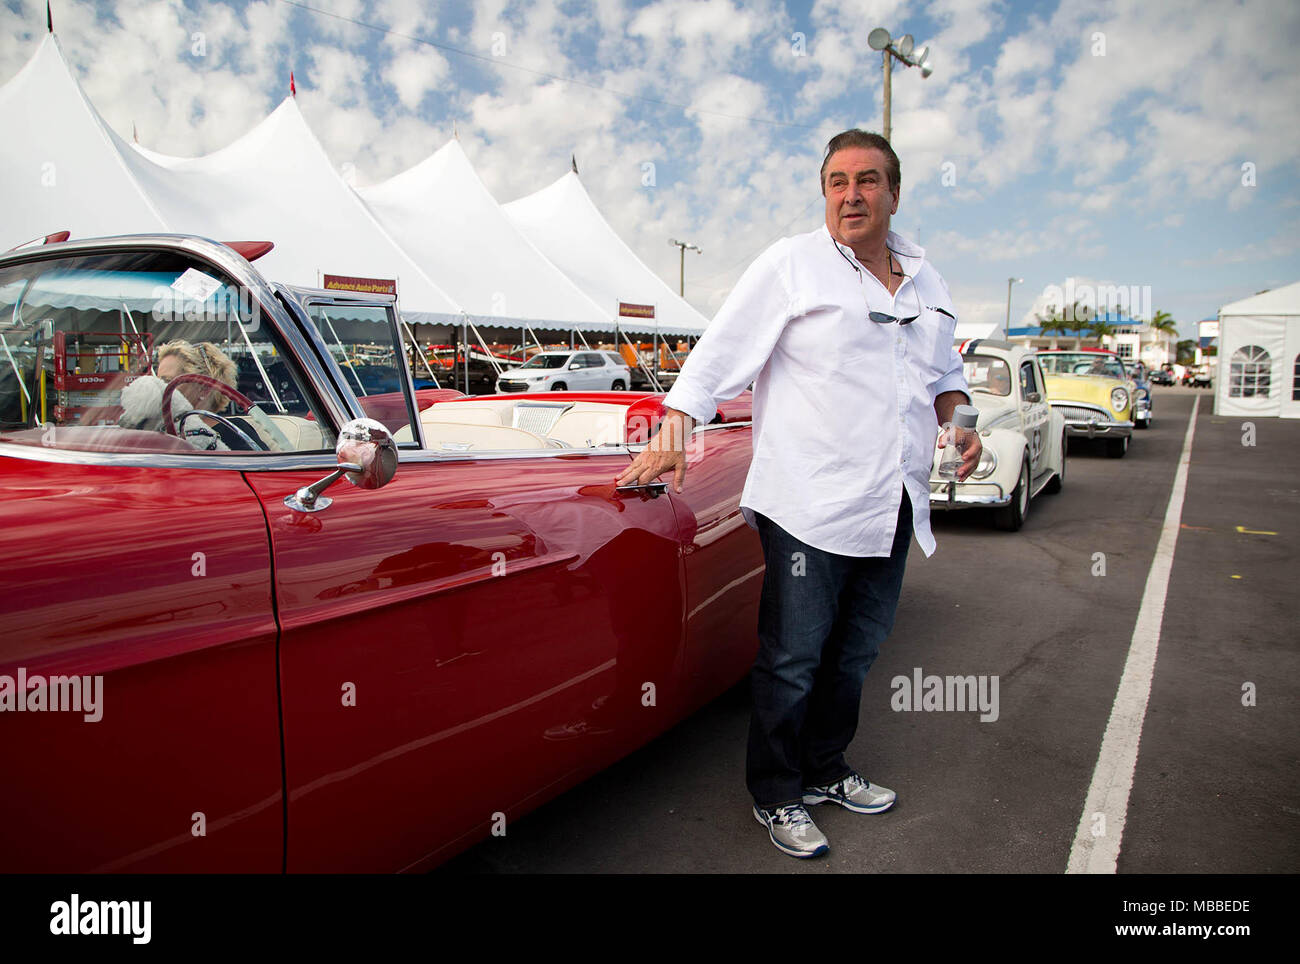 West Palm Beach, Florida, USA. 10th Apr, 2018. John Staluppi with his wife, Jeanette, and dog, Buddy, arrive at Barrett-Jackson auto auction at the South Florida Fairgrounds in a 1957 Cadillac Eldorado Biarritz convertible in West Palm Beach, Florida on April 10, 2018. Staluppi chaperoned a parade of selected cars from his Cars of Dreams Collection to the auto auction. Staluppi's collection of more than 140 cars will be sold at the 16th annual auction April 12-15. Staluppi plans to add to his current collection. Credit: Allen Eyestone/The Palm Beach Post/ZUMA Wire/Alamy Live News Stock Photo